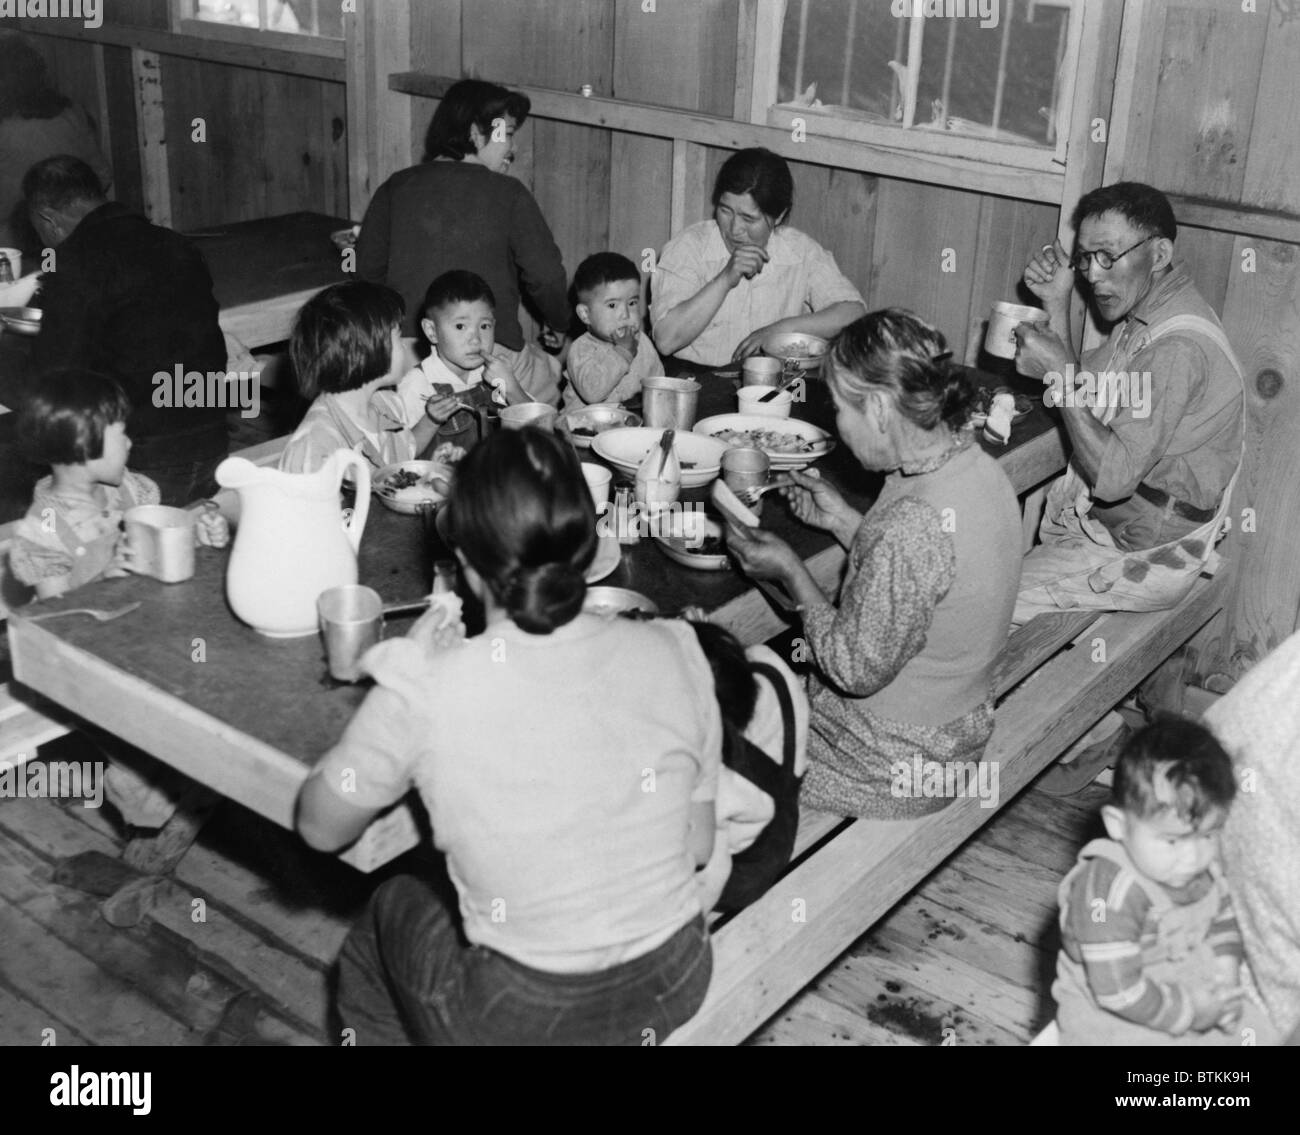 Multiple generations of Japanese Americans at meal time in the Manzanar Internment Camp barracks dining area. Stock Photo